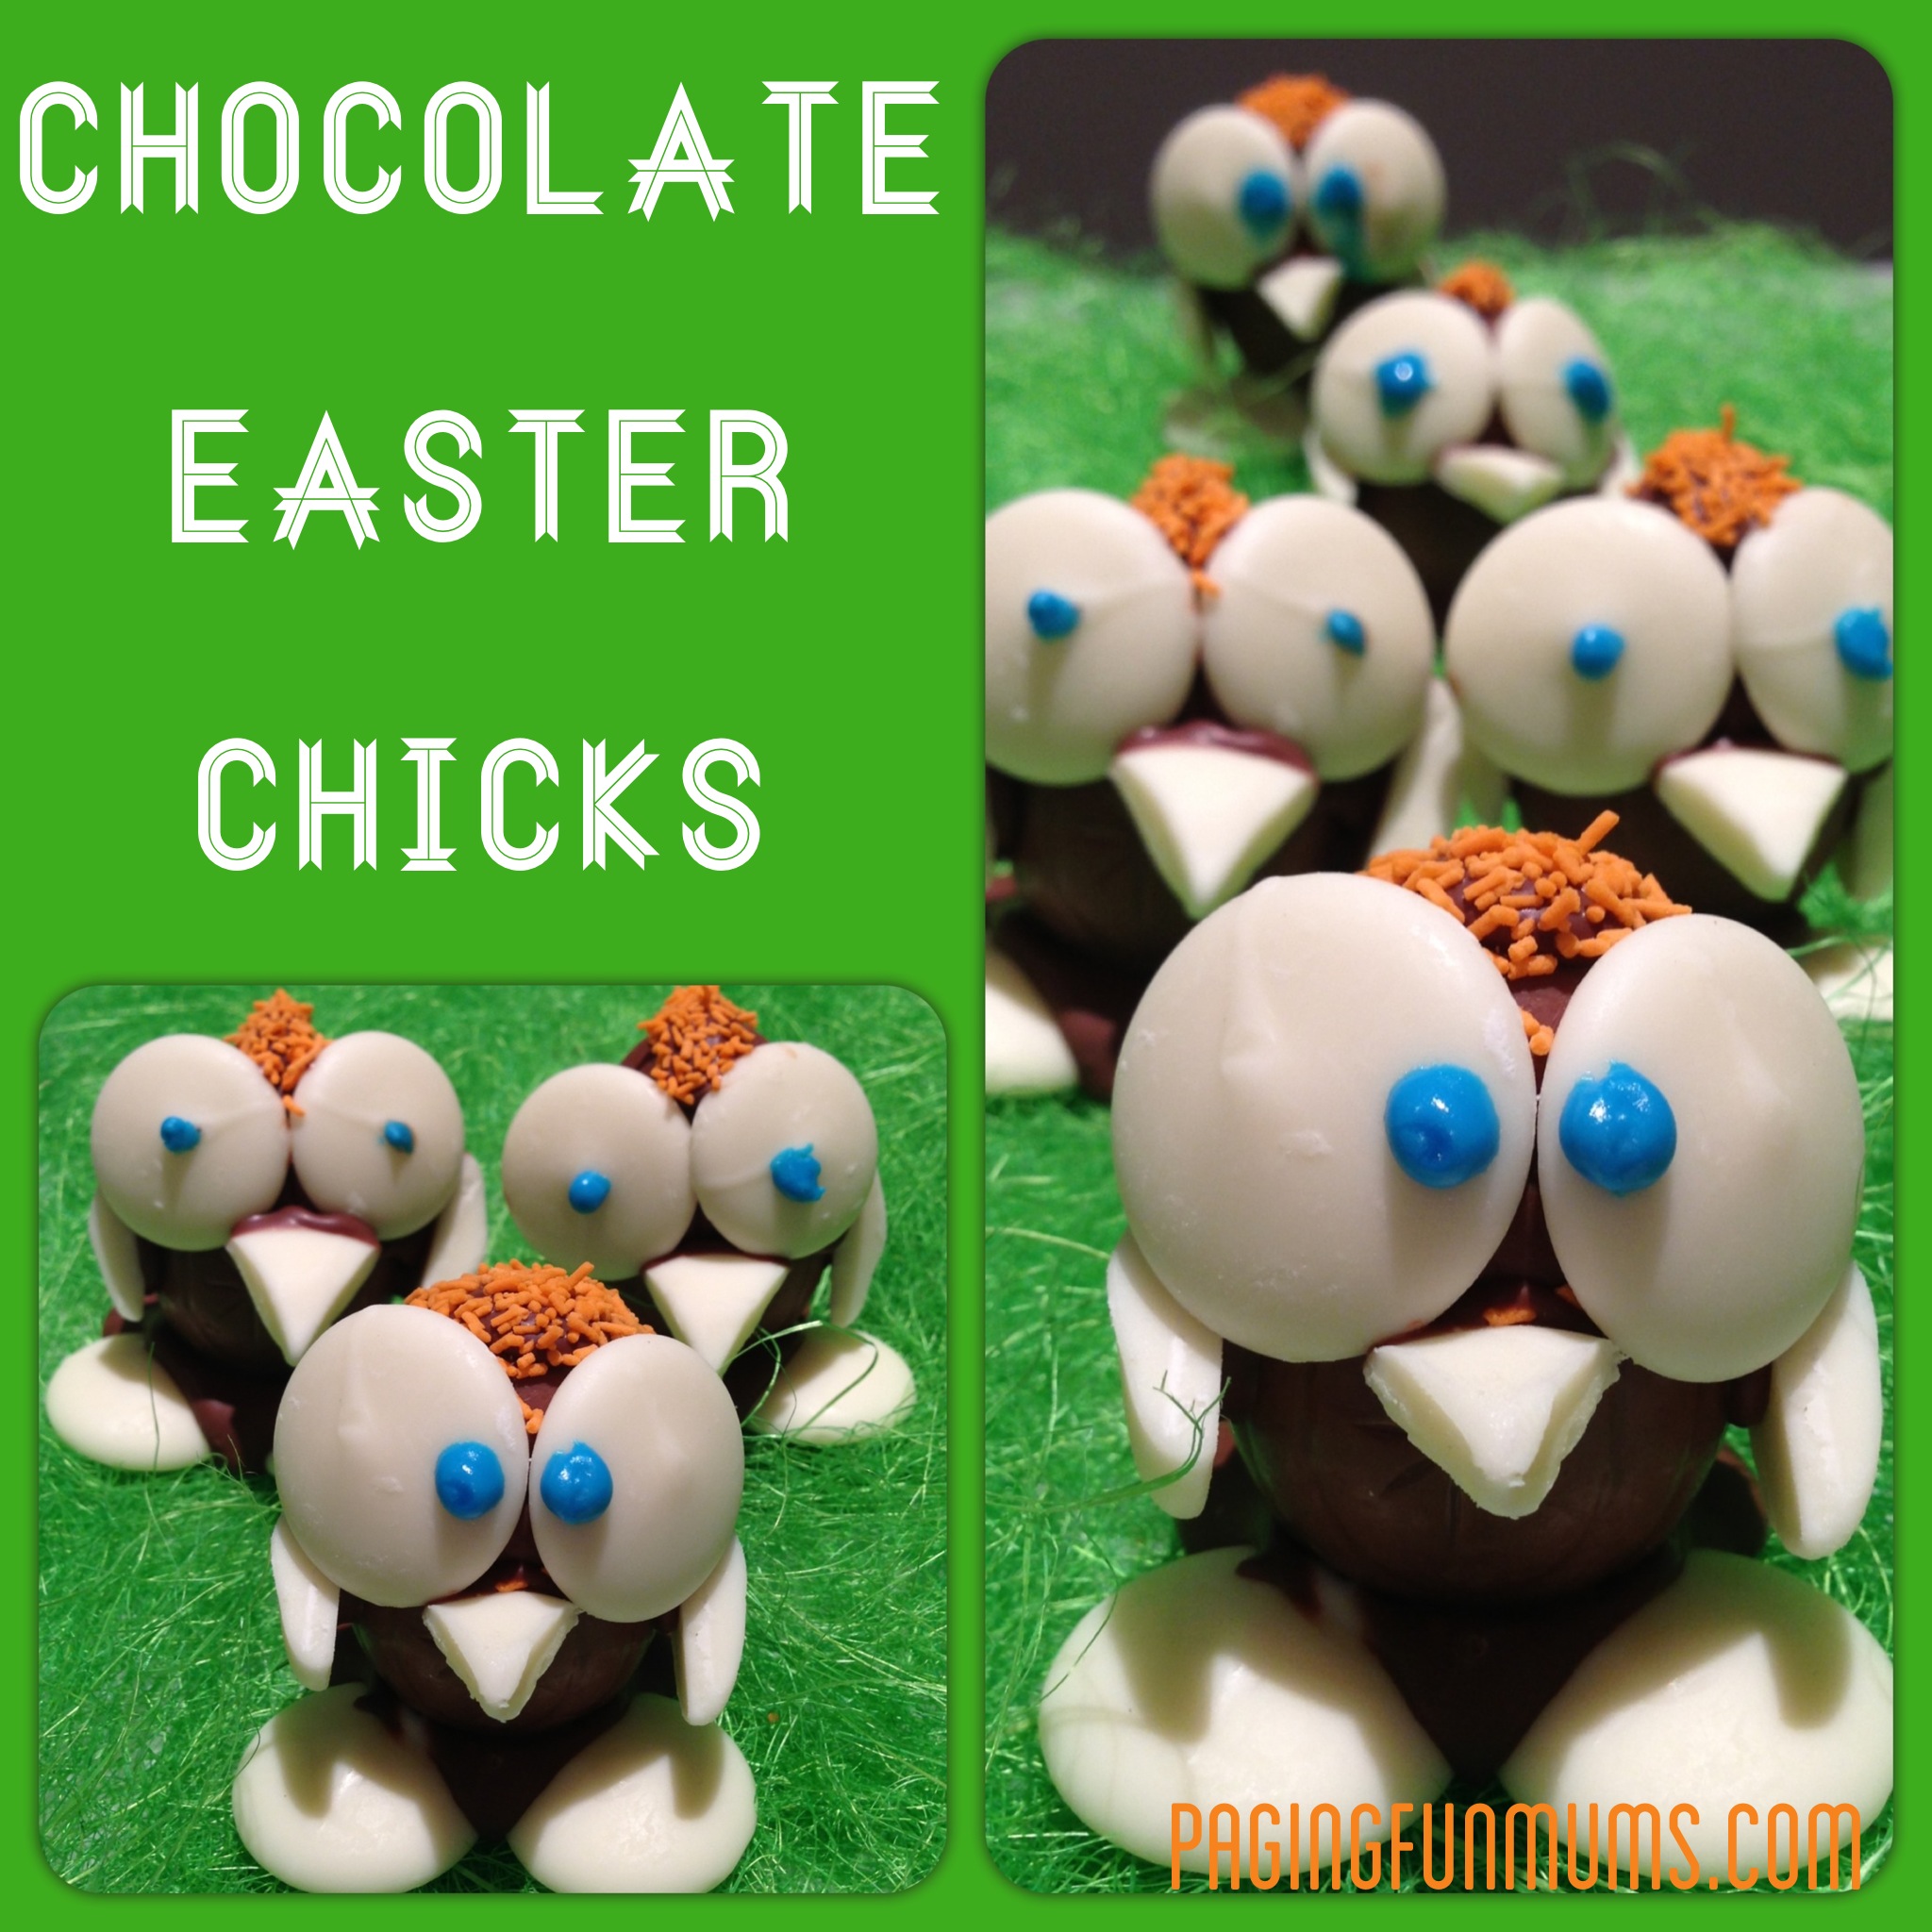 Chocolate Easter Chicks